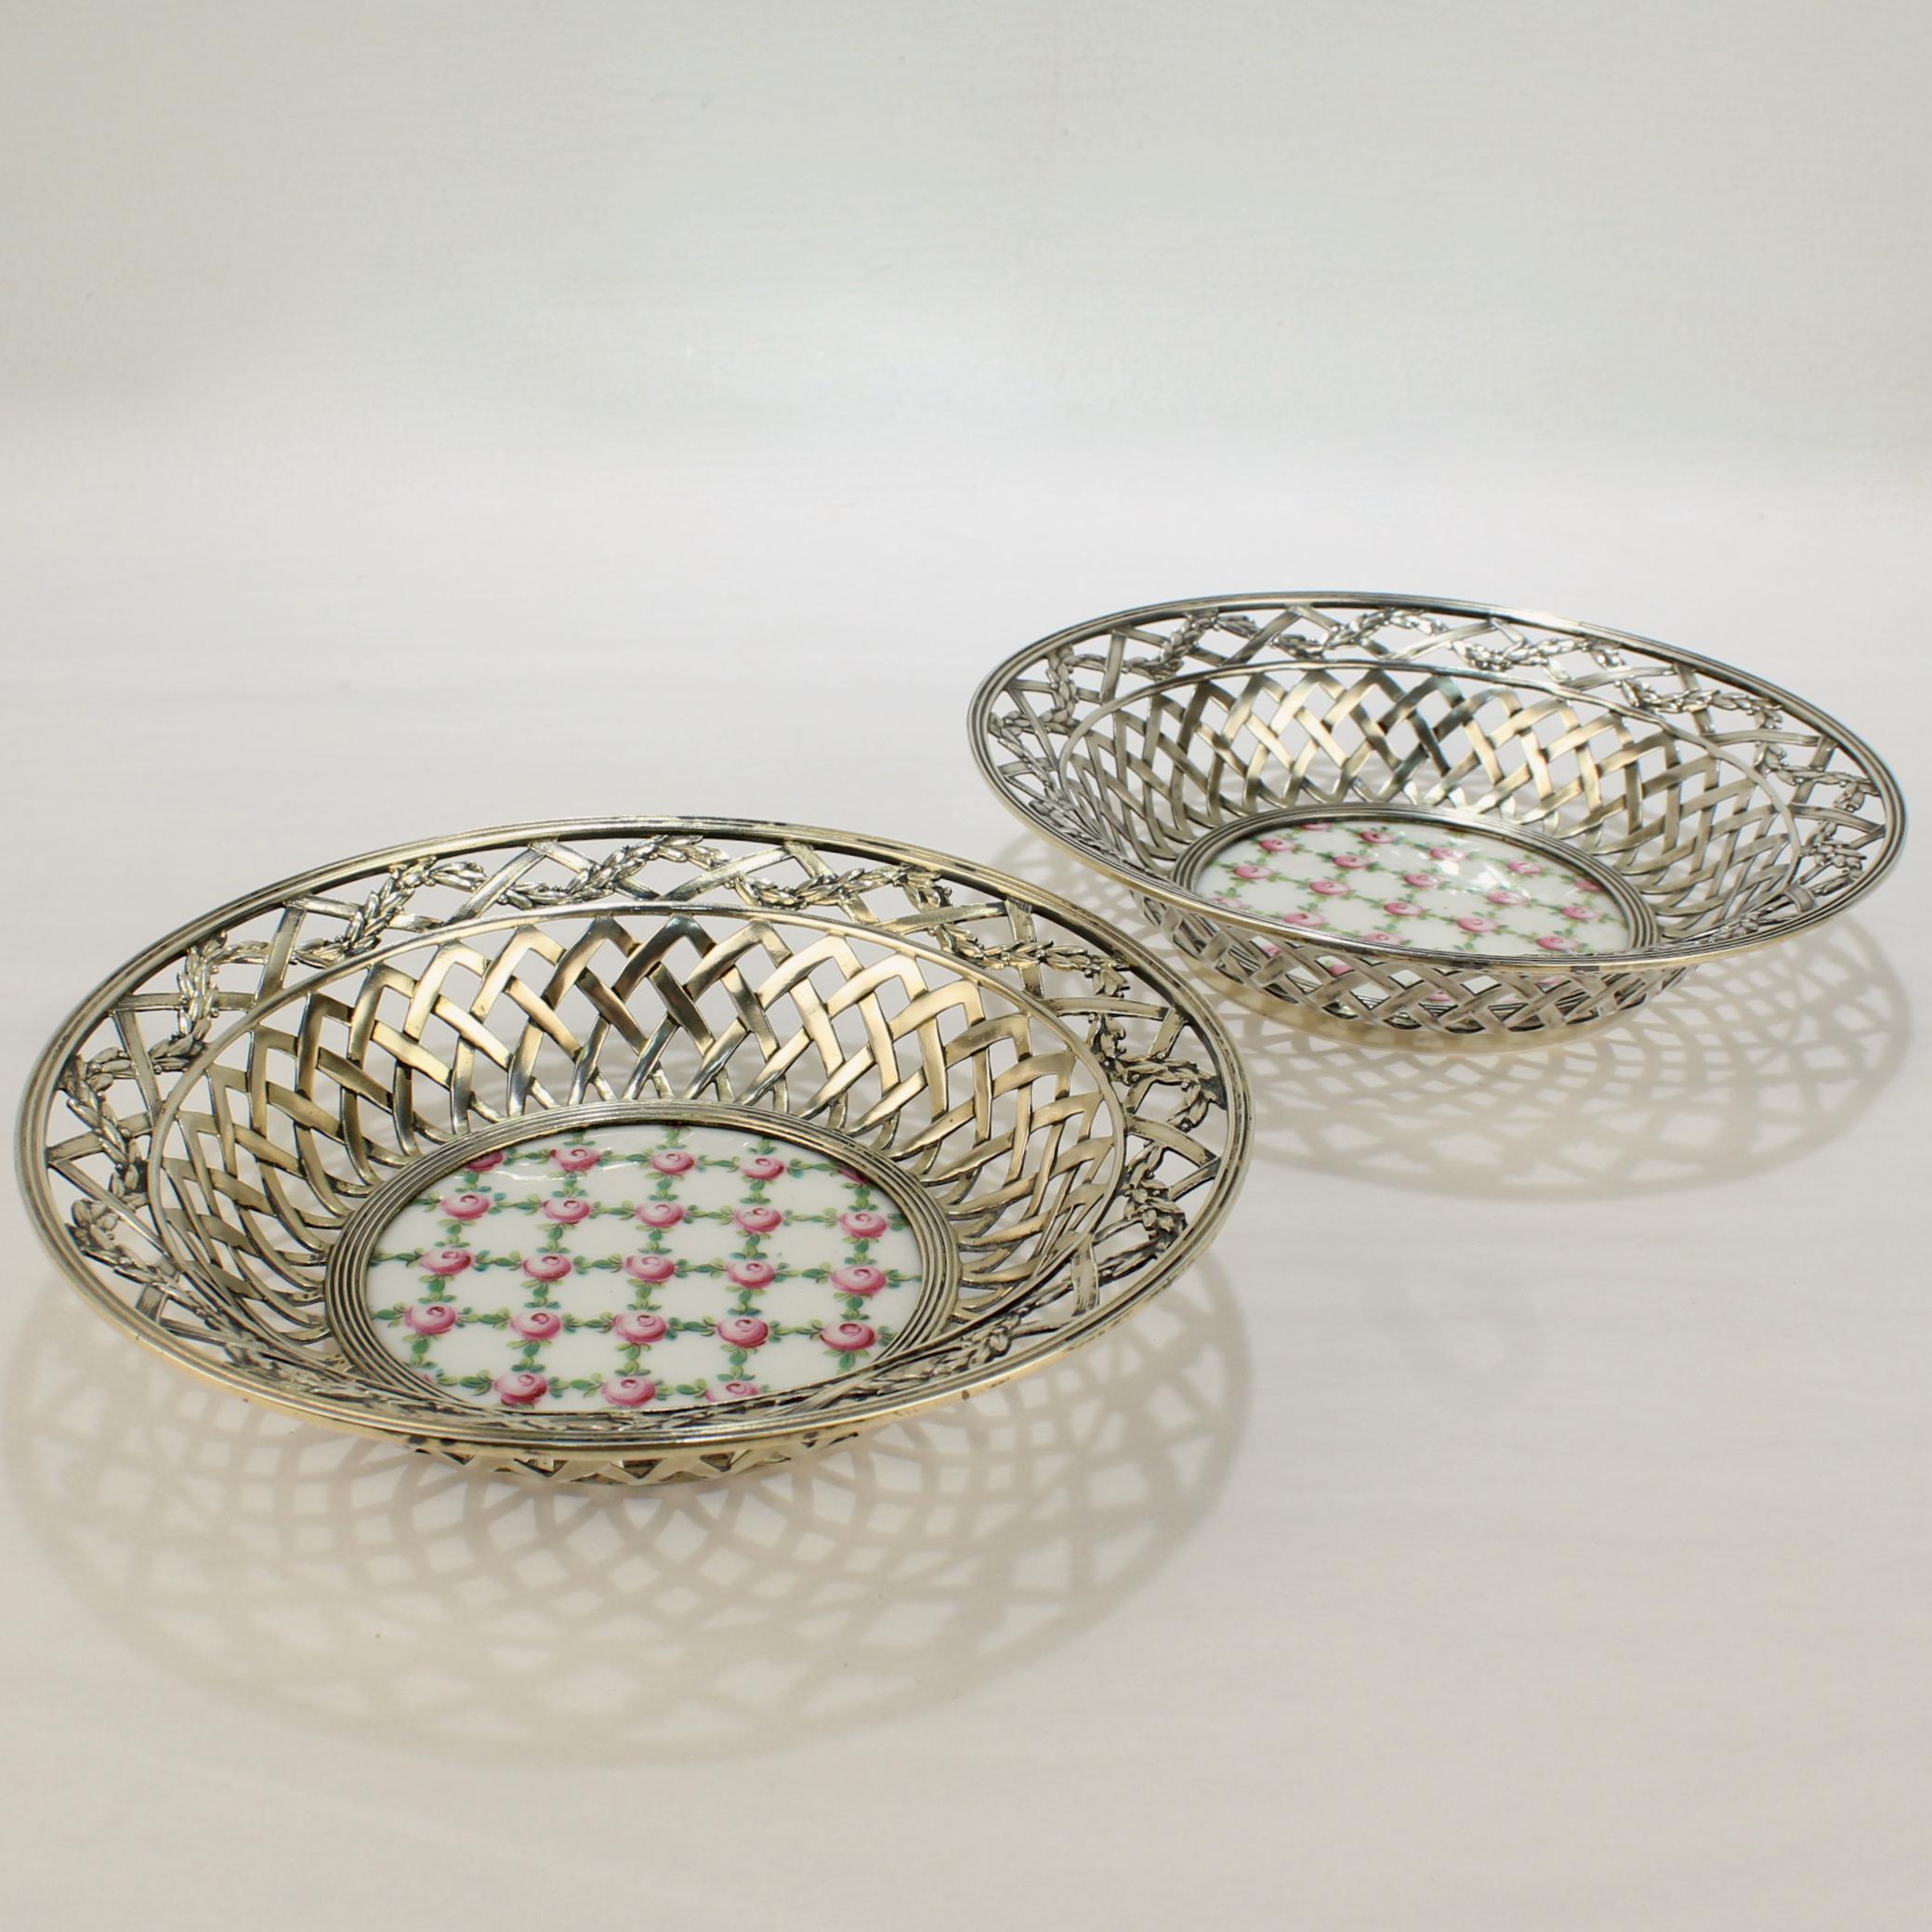 Belle Époque Pair of Antique Reticulated Sterling Silver Bowls with Sevres Porcelain Plaques For Sale